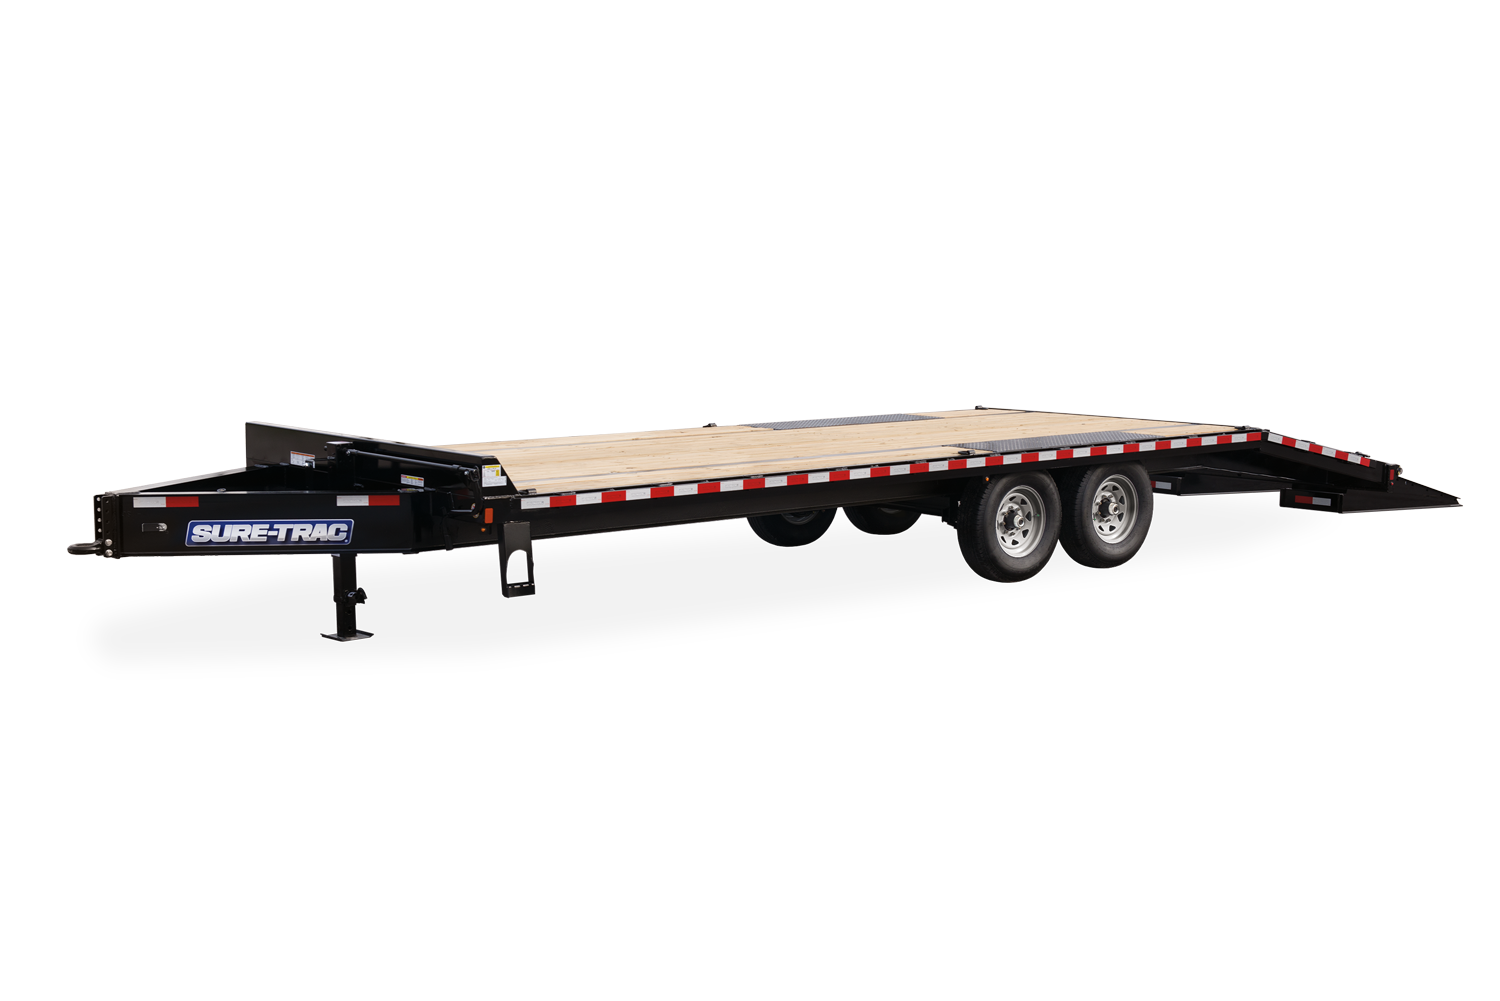 Sure-Trac | Image | Wide Shot of the 15K Model HD Low Profile Beavertail Deckover